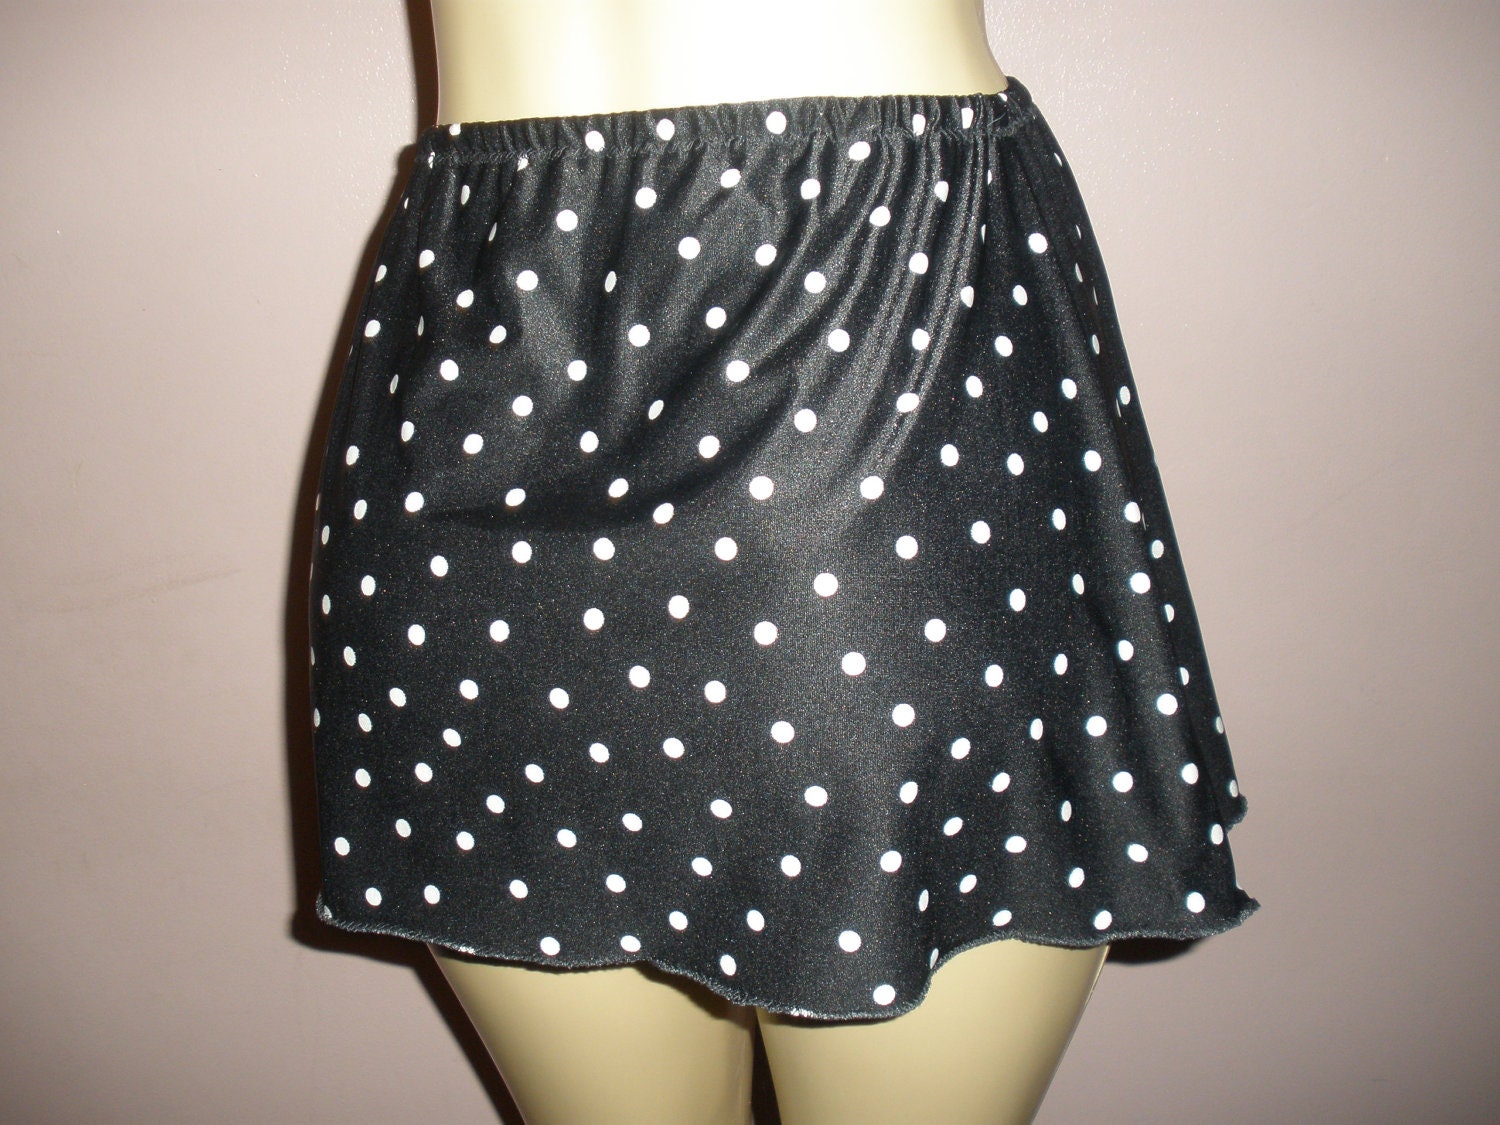 Cute 2 Piece Cream White Top with Black and White Polk A Dot Skirt Swim Suit Cover Up Size Meduim